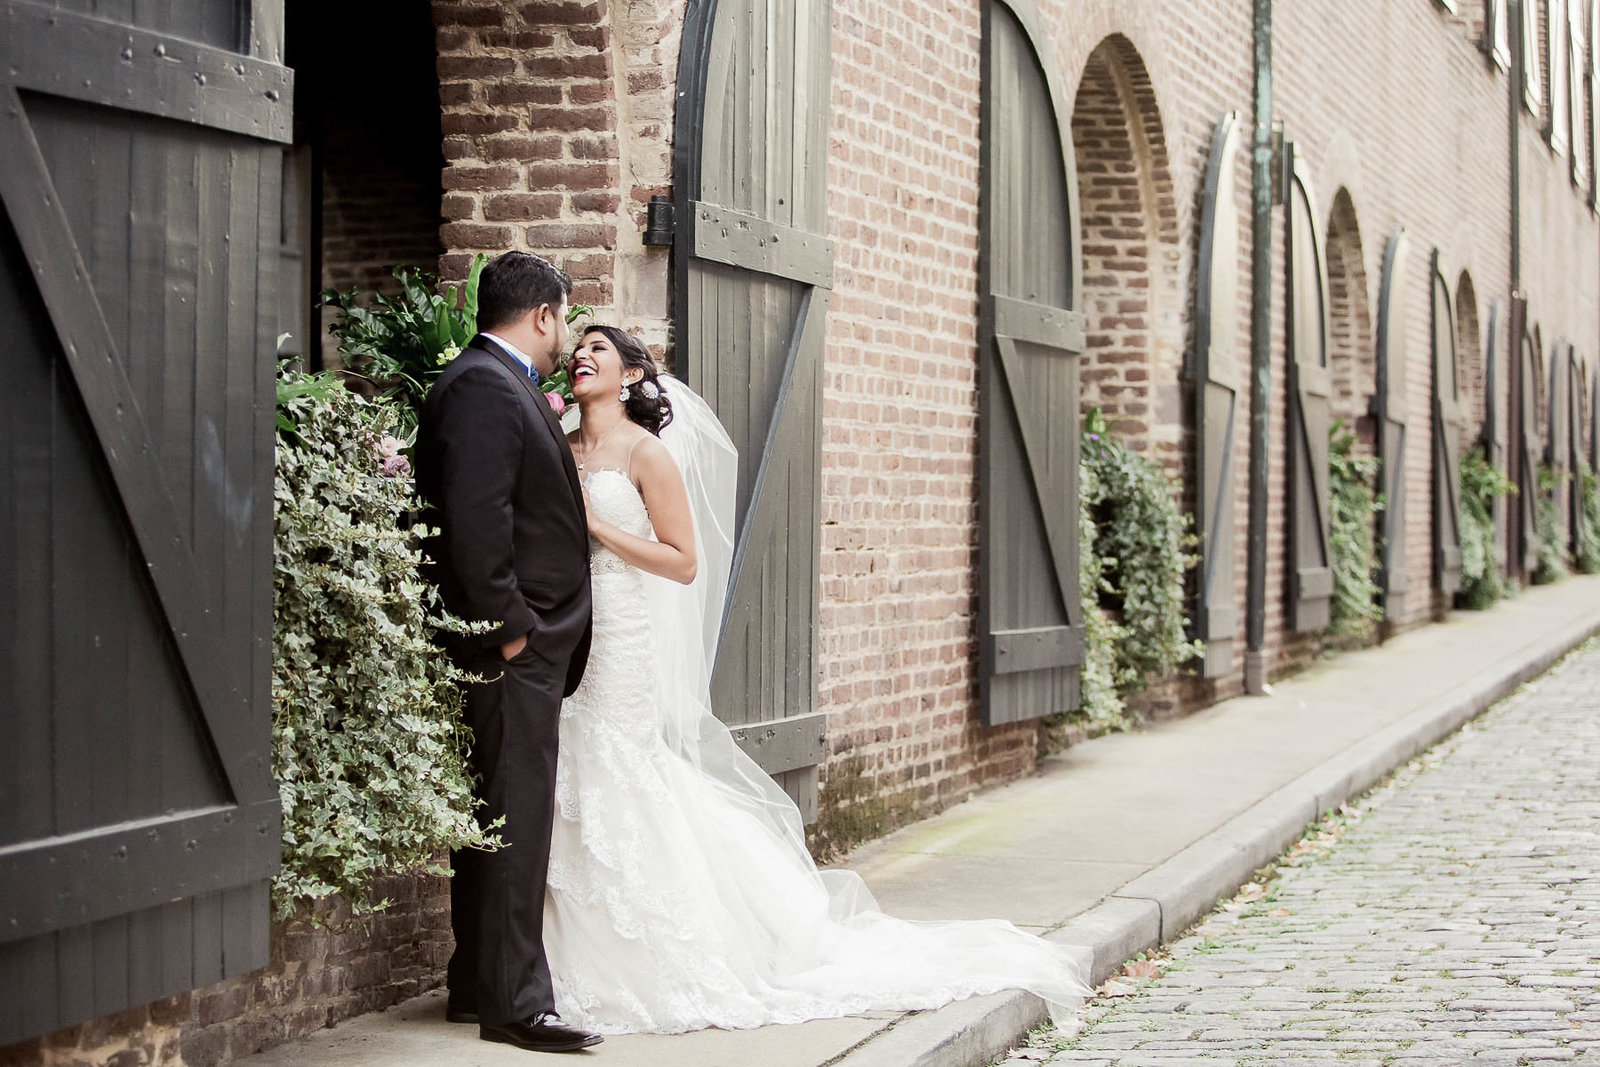 Bride and groom stand by stable doors, French Quarter, South Carolina